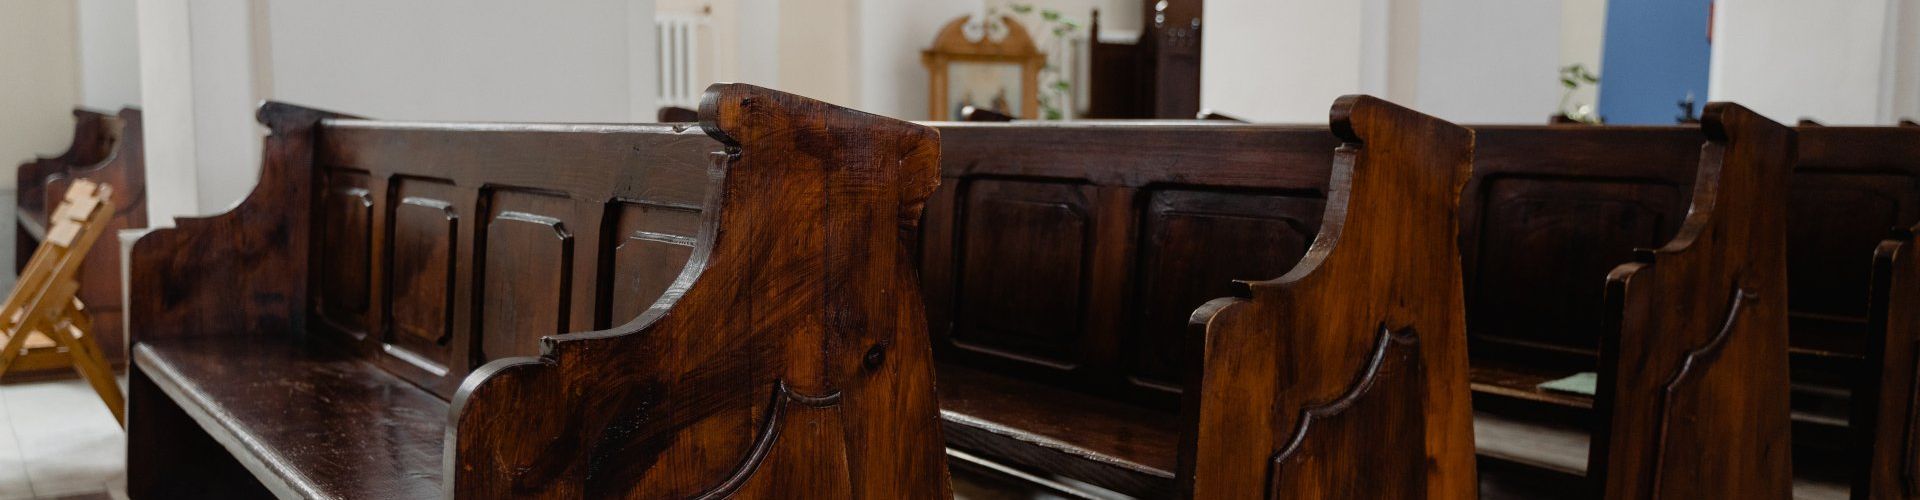 a row of wooden benches in a church